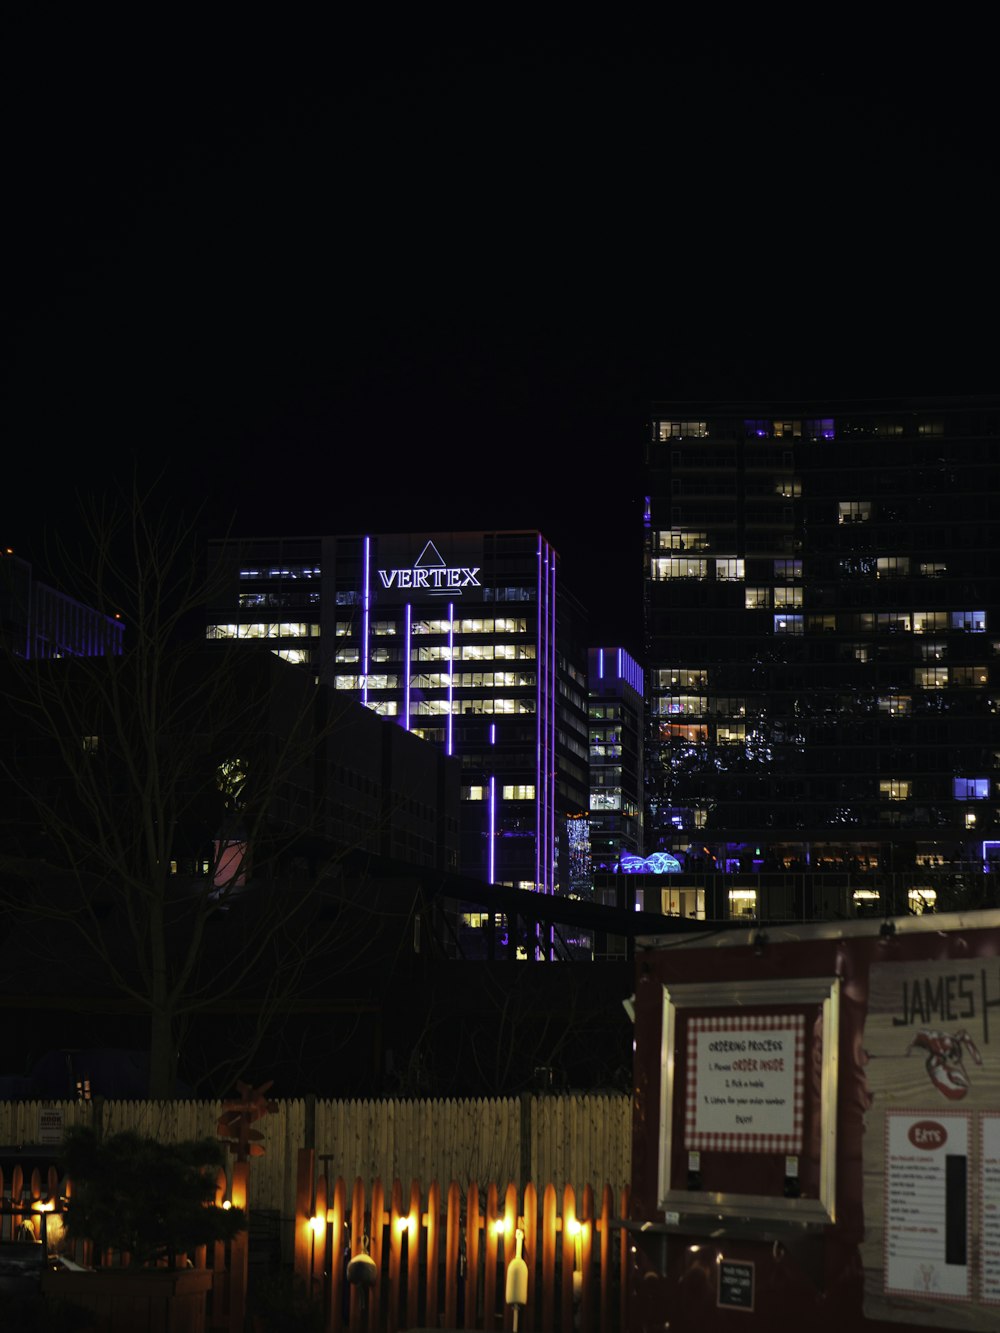 a view of a city at night from across the street